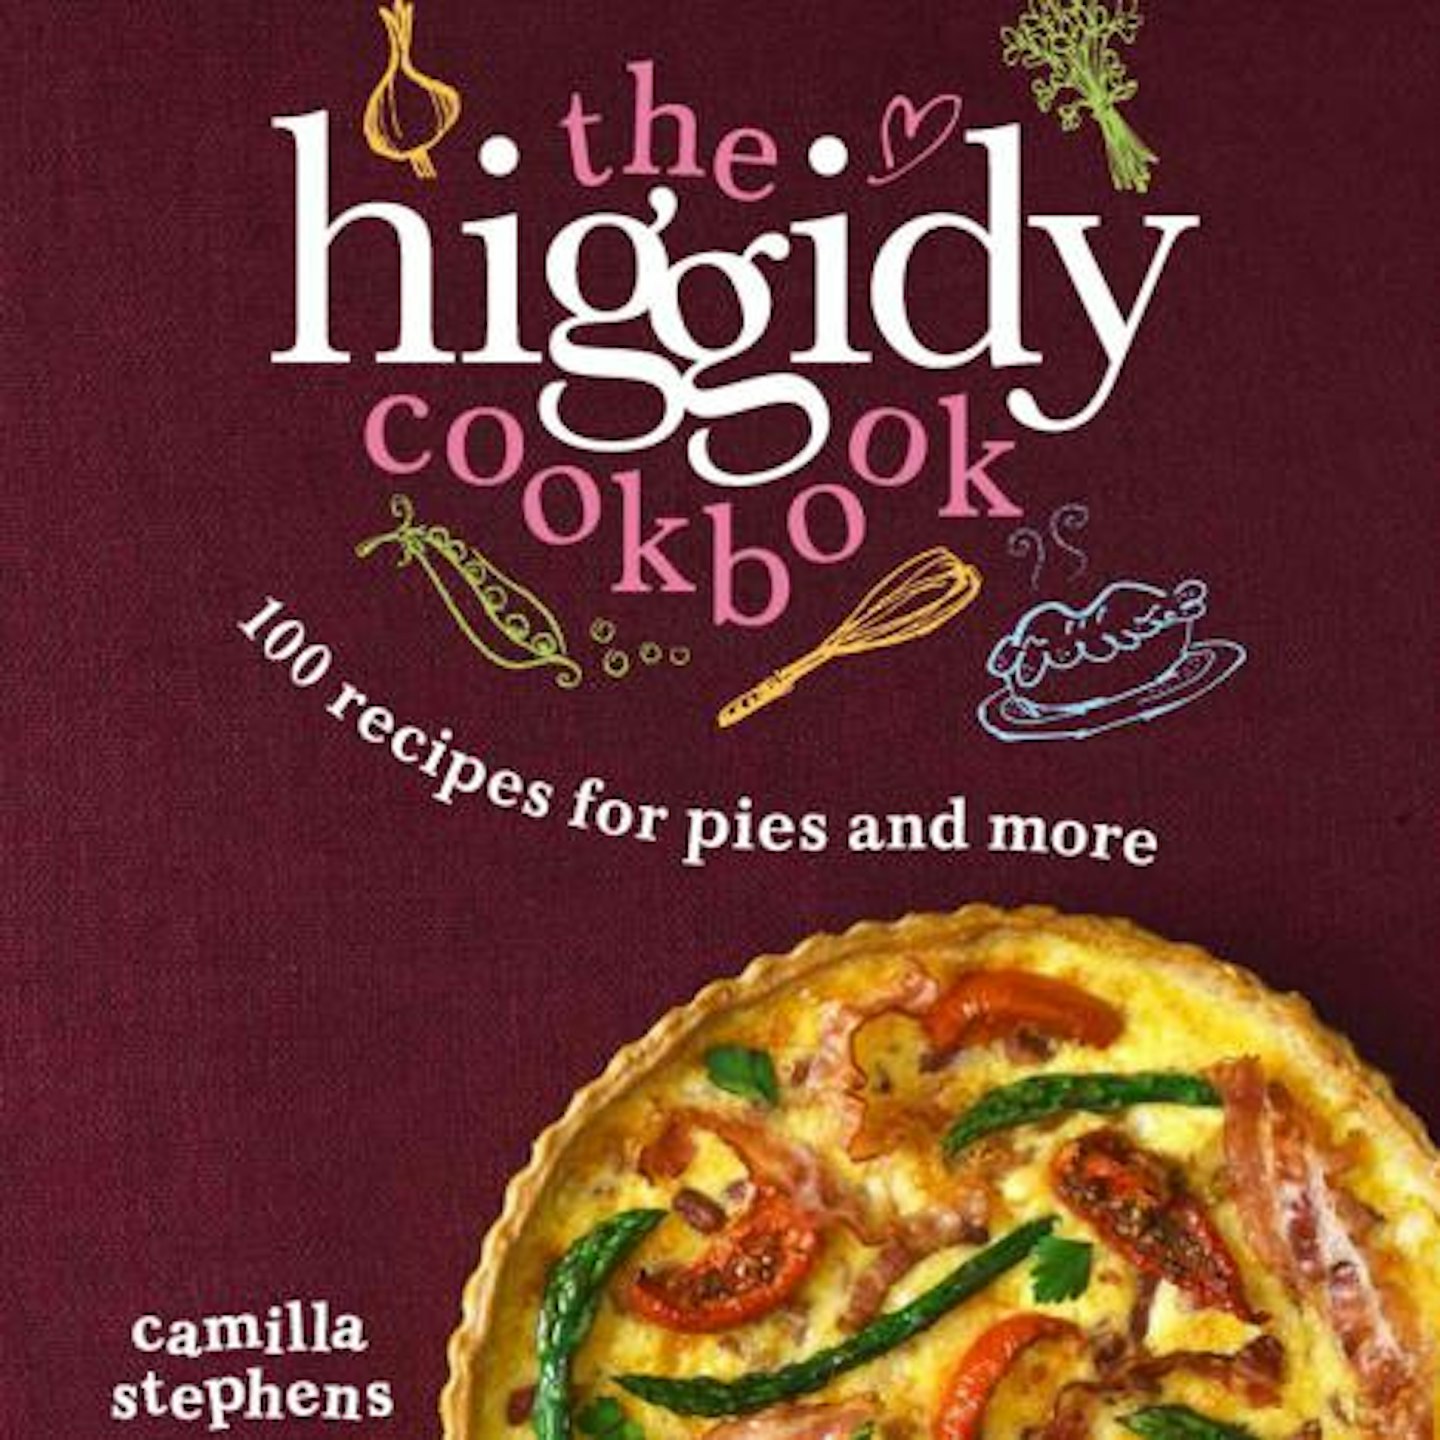 The Higgidy Cookbook by Camilla Stephens is published by Quercus on 12 September, £16.99